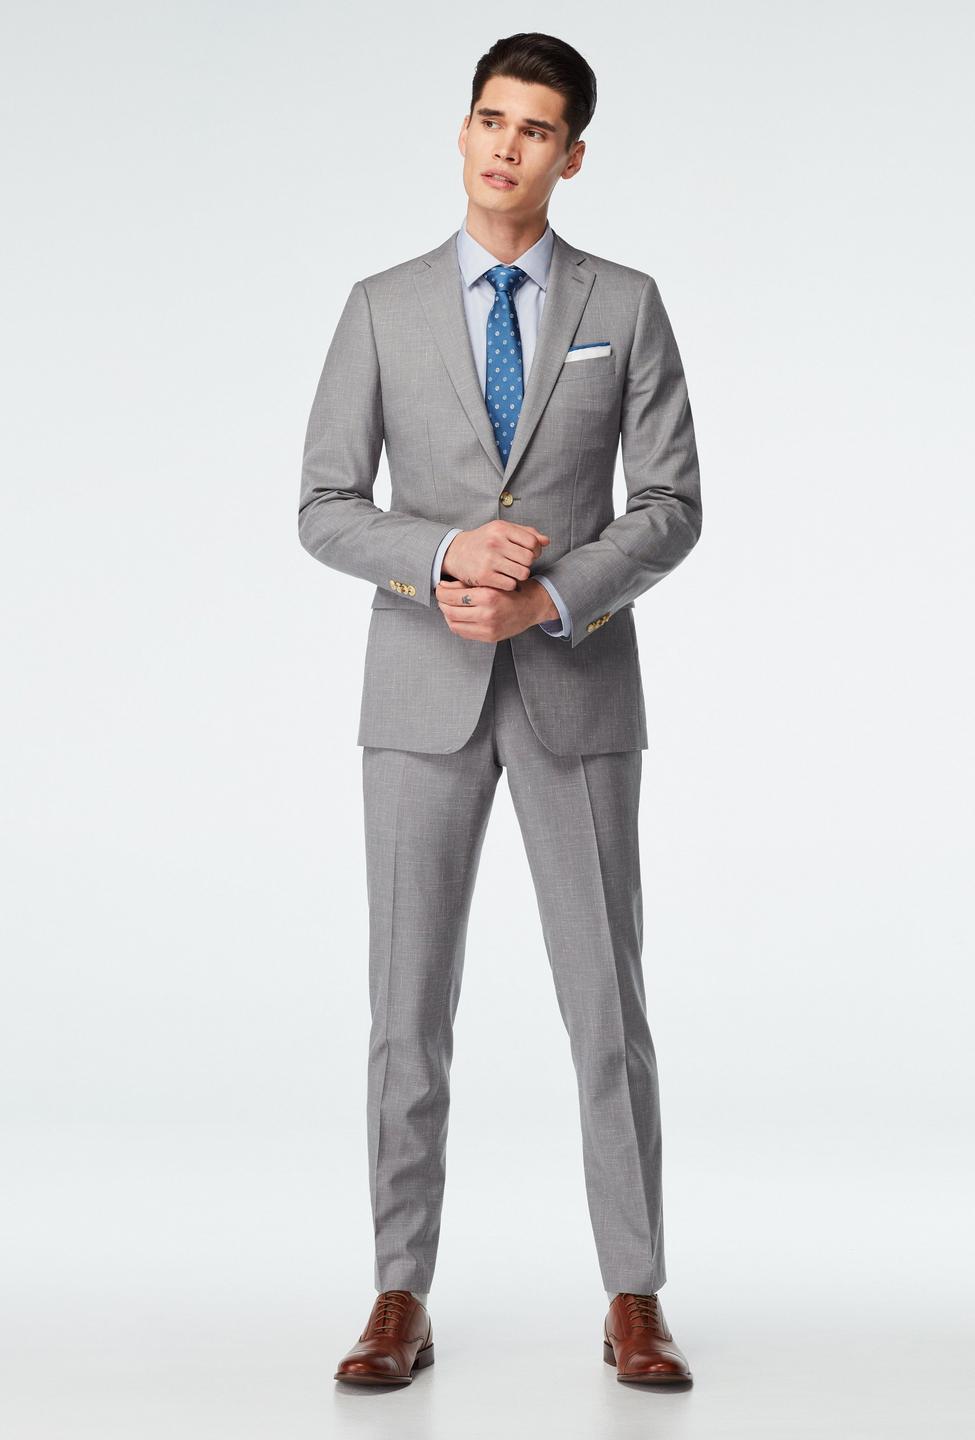 Gray suit - Stockport Solid Design from Seasonal Indochino Collection